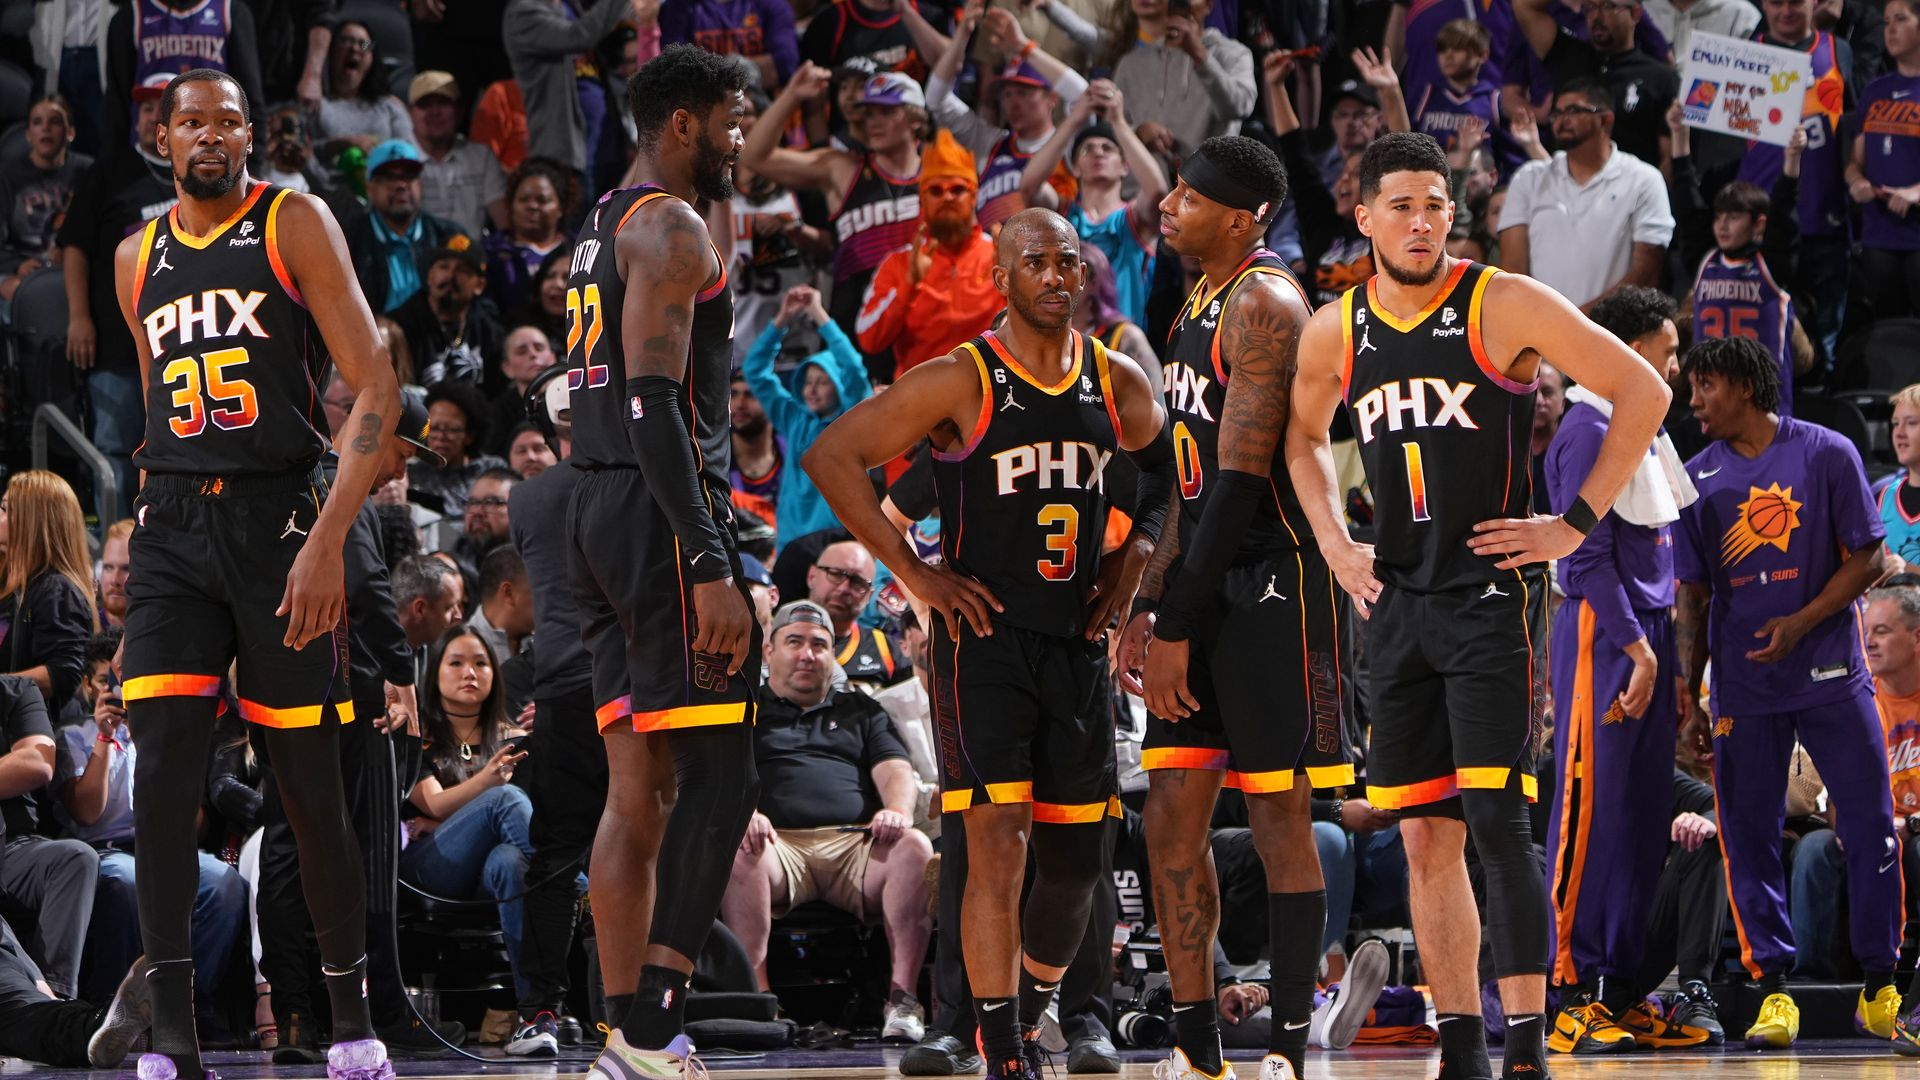 Five basketball players in black jerseys with PHX on the front stand next to each other on a basketball court.